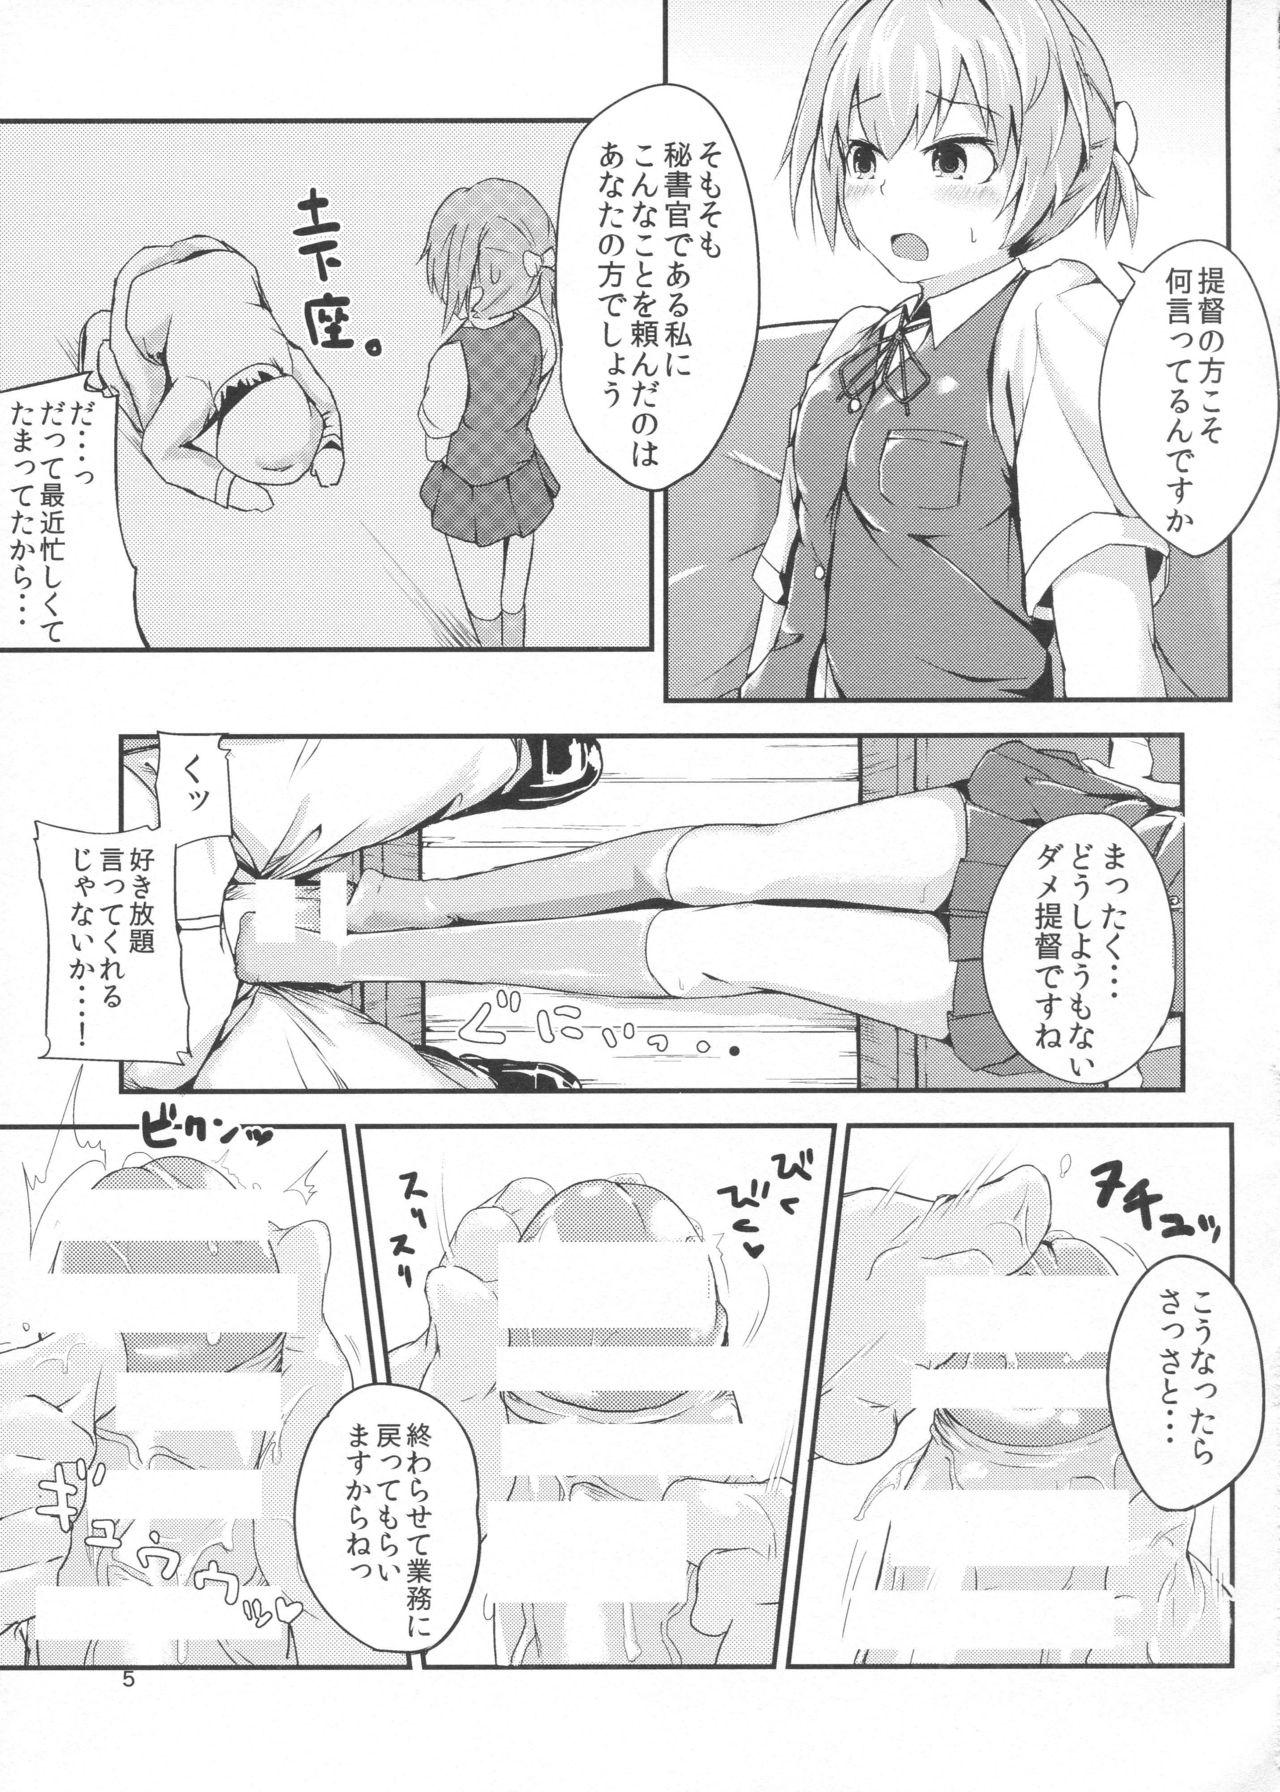 Farting Tsun to Dere Nui - Kantai collection Ex Girlfriend - Page 6